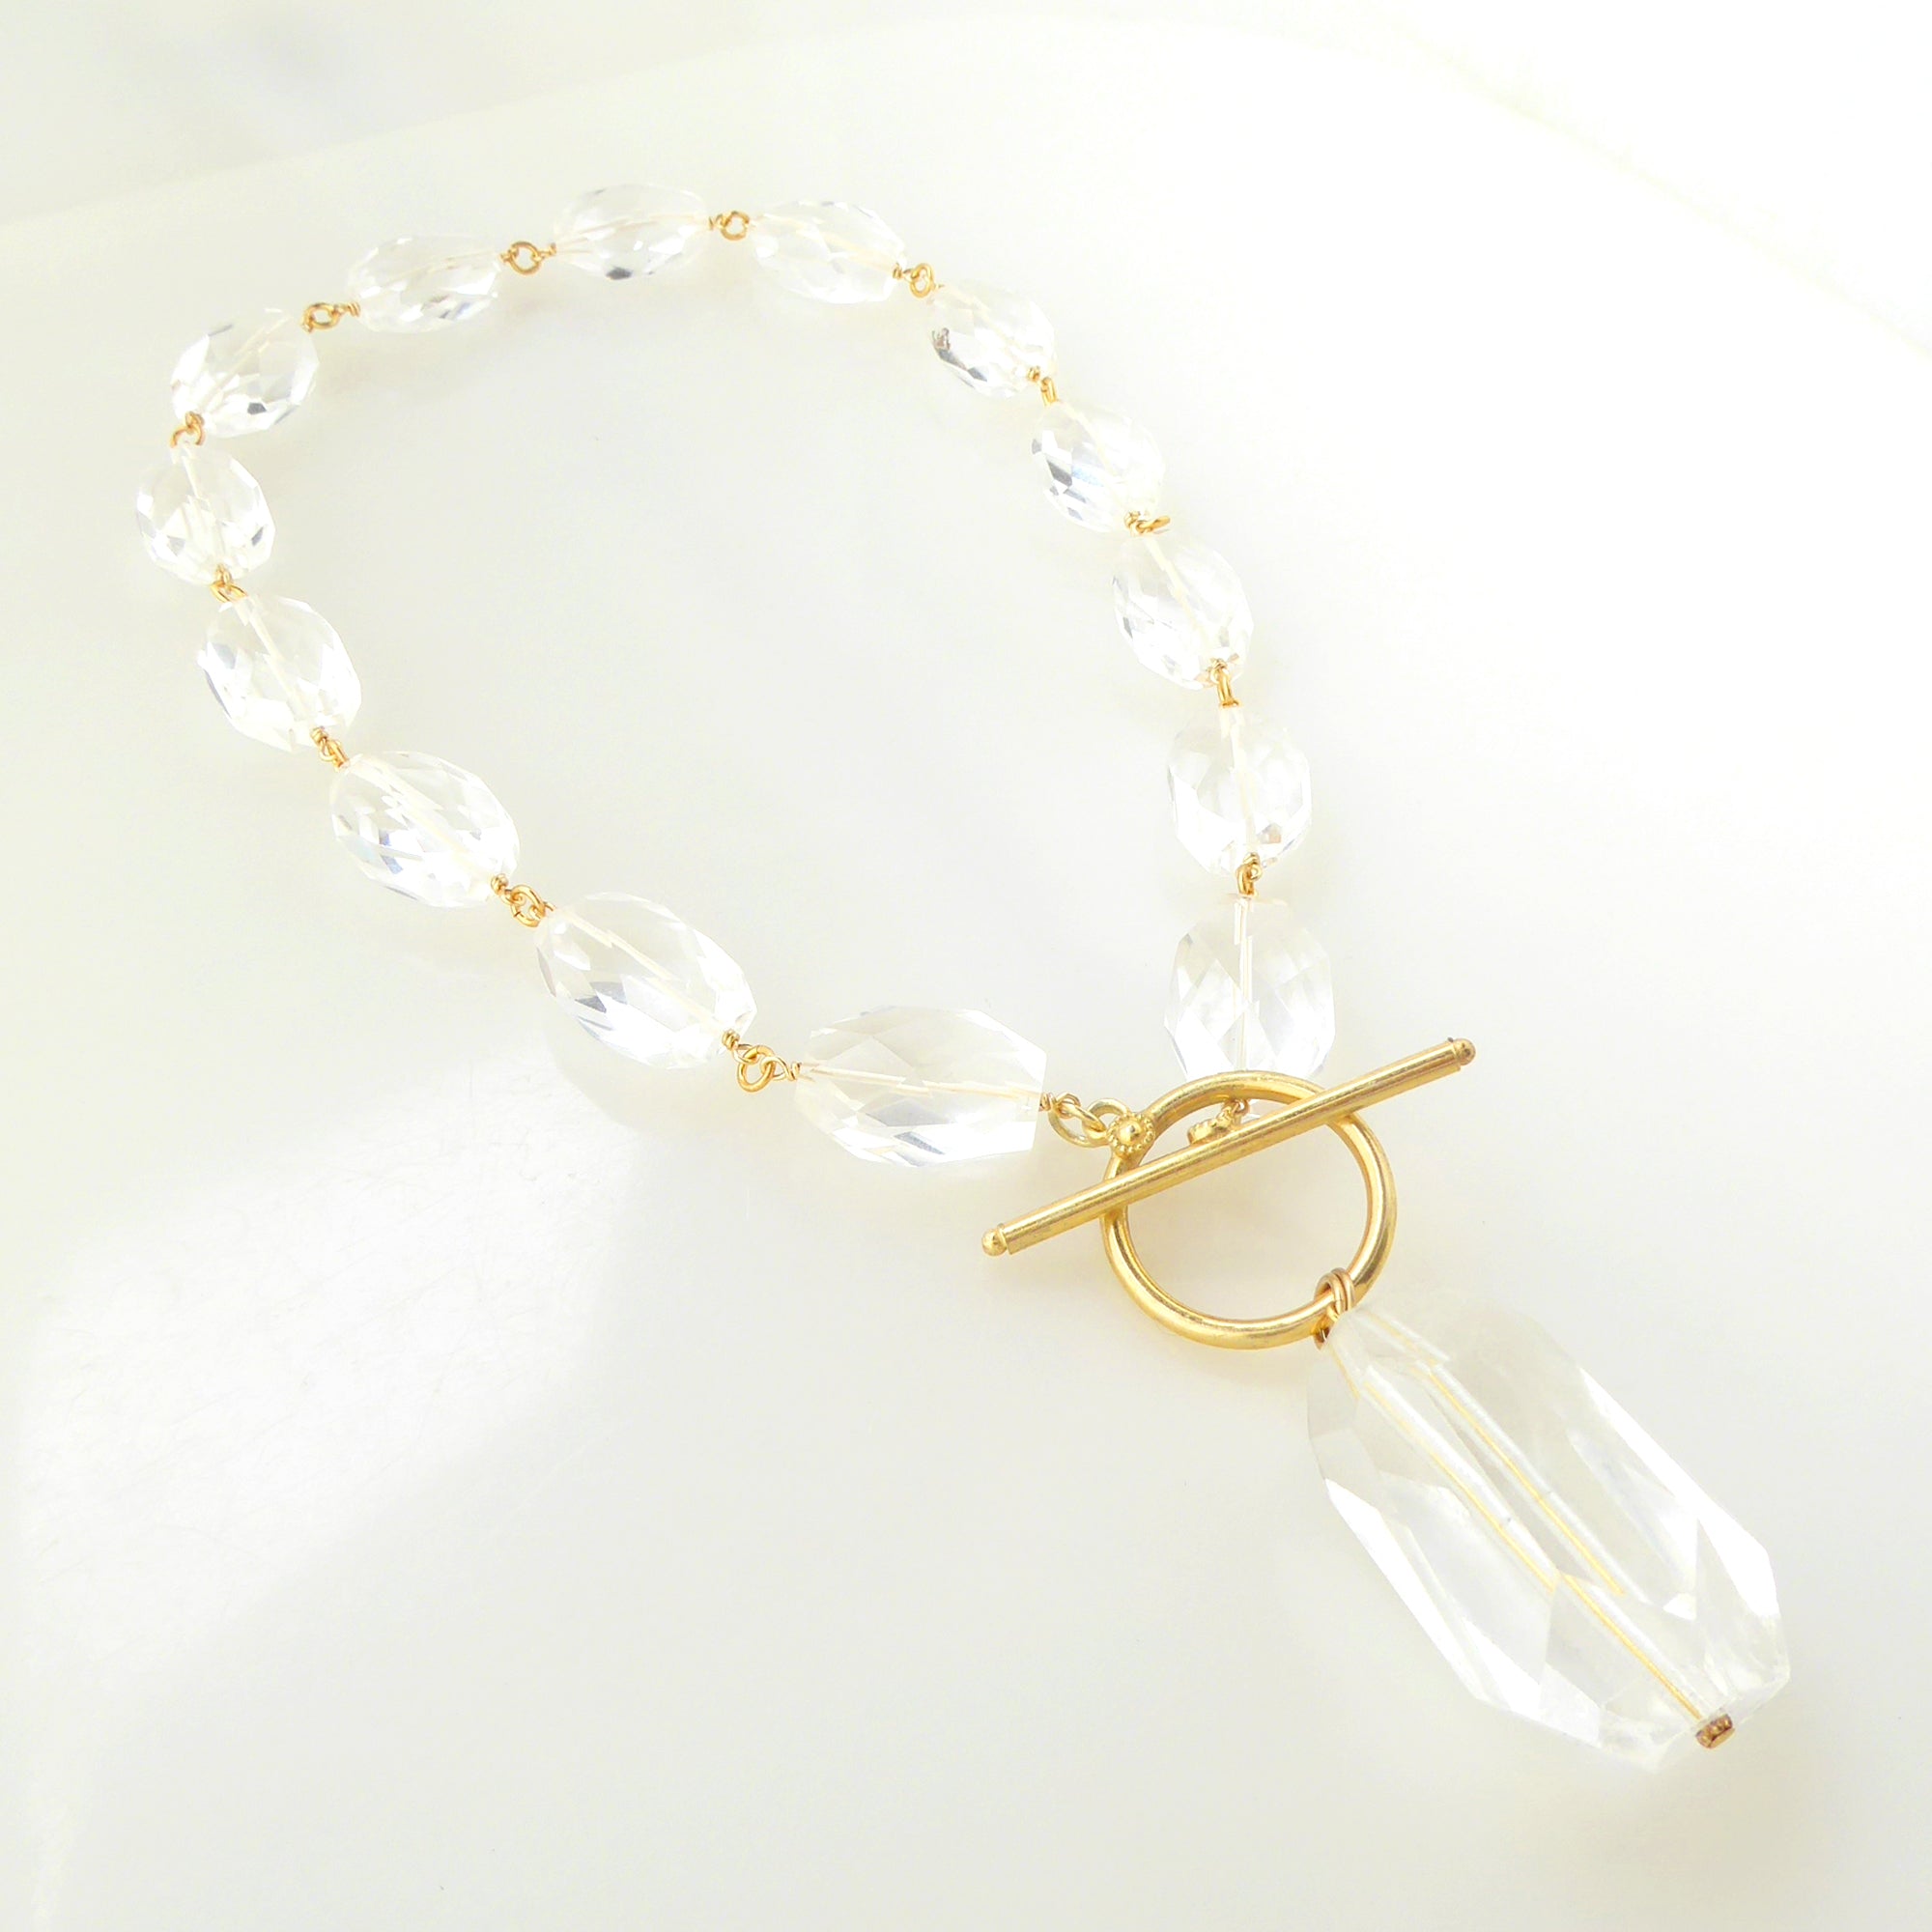 Quartz nugget toggle necklace by Jenny Dayco 2